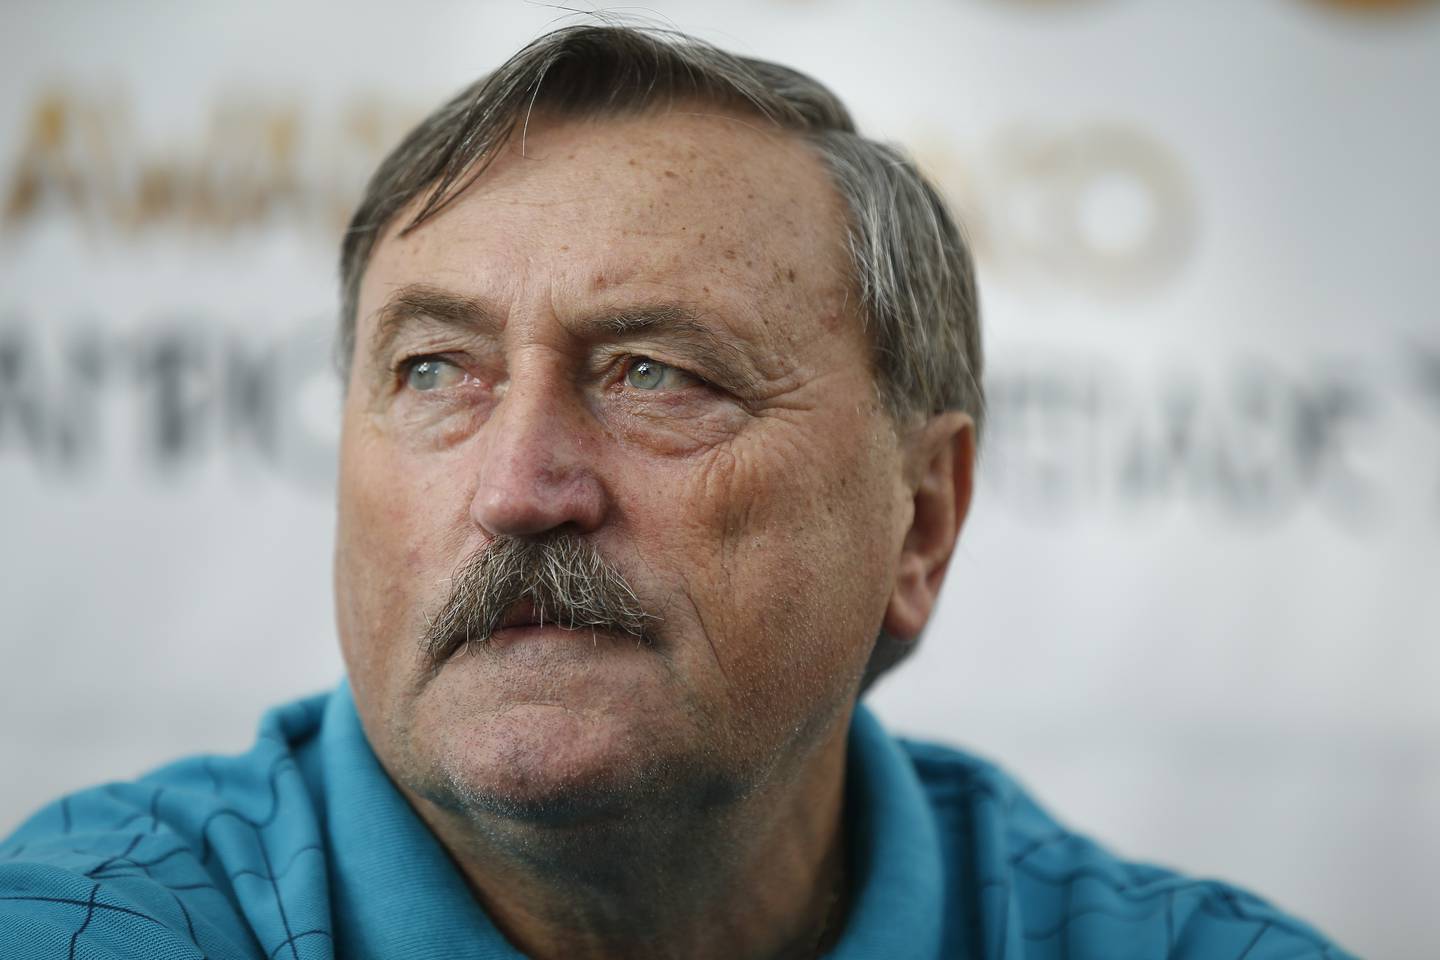 (FILES) -- This file picture taken on October 10, 2014 shows Czech former football player Antonin Panenka looking on during a press conference in Monaco, during the 2014 Golden Foot Award. For exactly four decades, goalkeepers have been haunted by the "Panenka" penalty kick that leaves them diving to the side while the ball falls slowly into the middle of the net. The western world first noticed the kick a year after it had been invented by then-Czechoslovak midfielder Antonin Panenka -- in the Euro 1976 final, he fooled German keeper Sepp Maier to hand his country a surprise win.   AFP PHOTO / VALERY HACHE